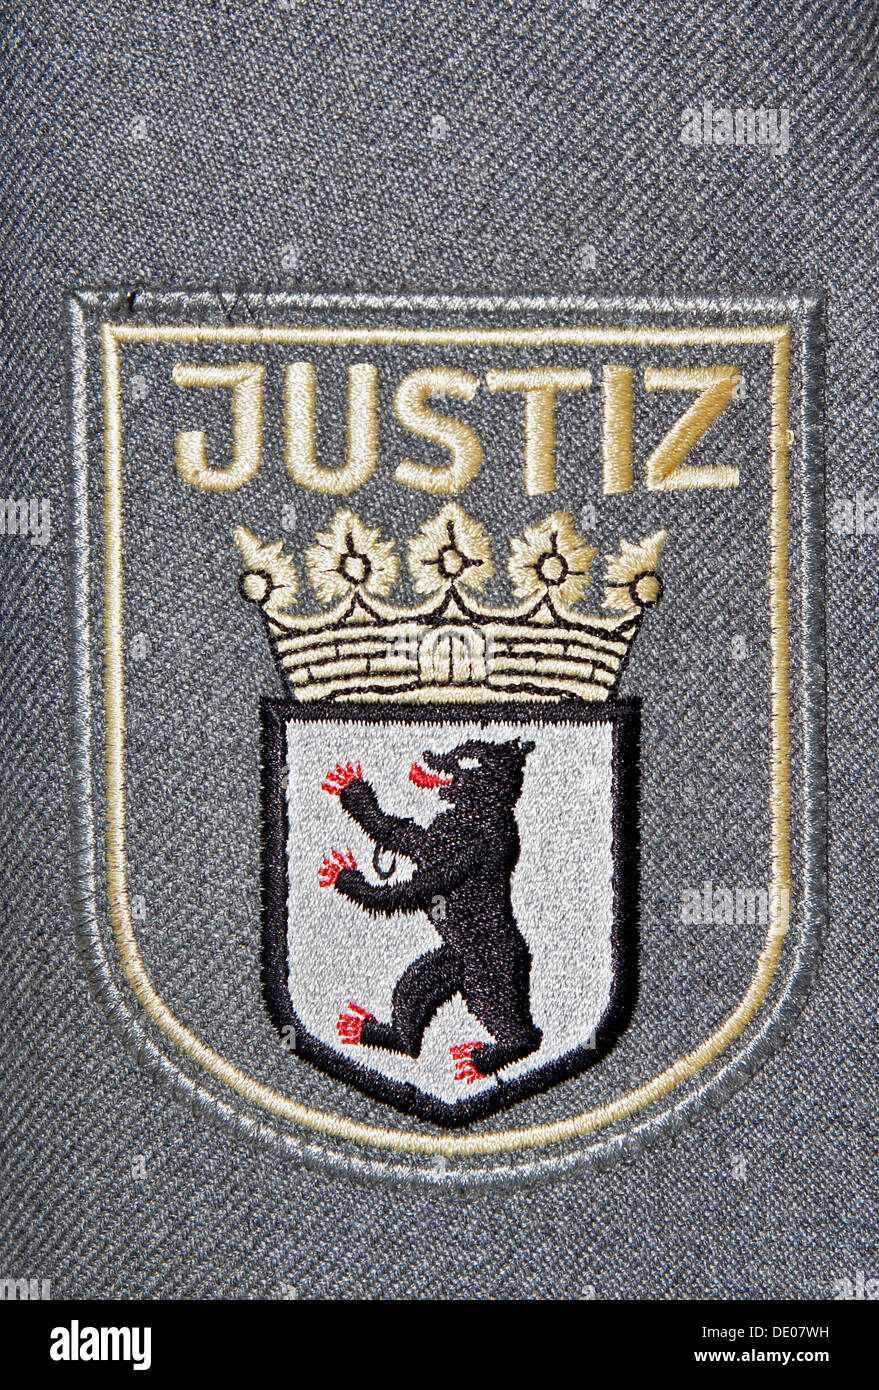 Badge, lettering 'Justiz', German for 'legal authority', coat of arms of Berlin, Courts of Berlin, Berlin Stock Photo